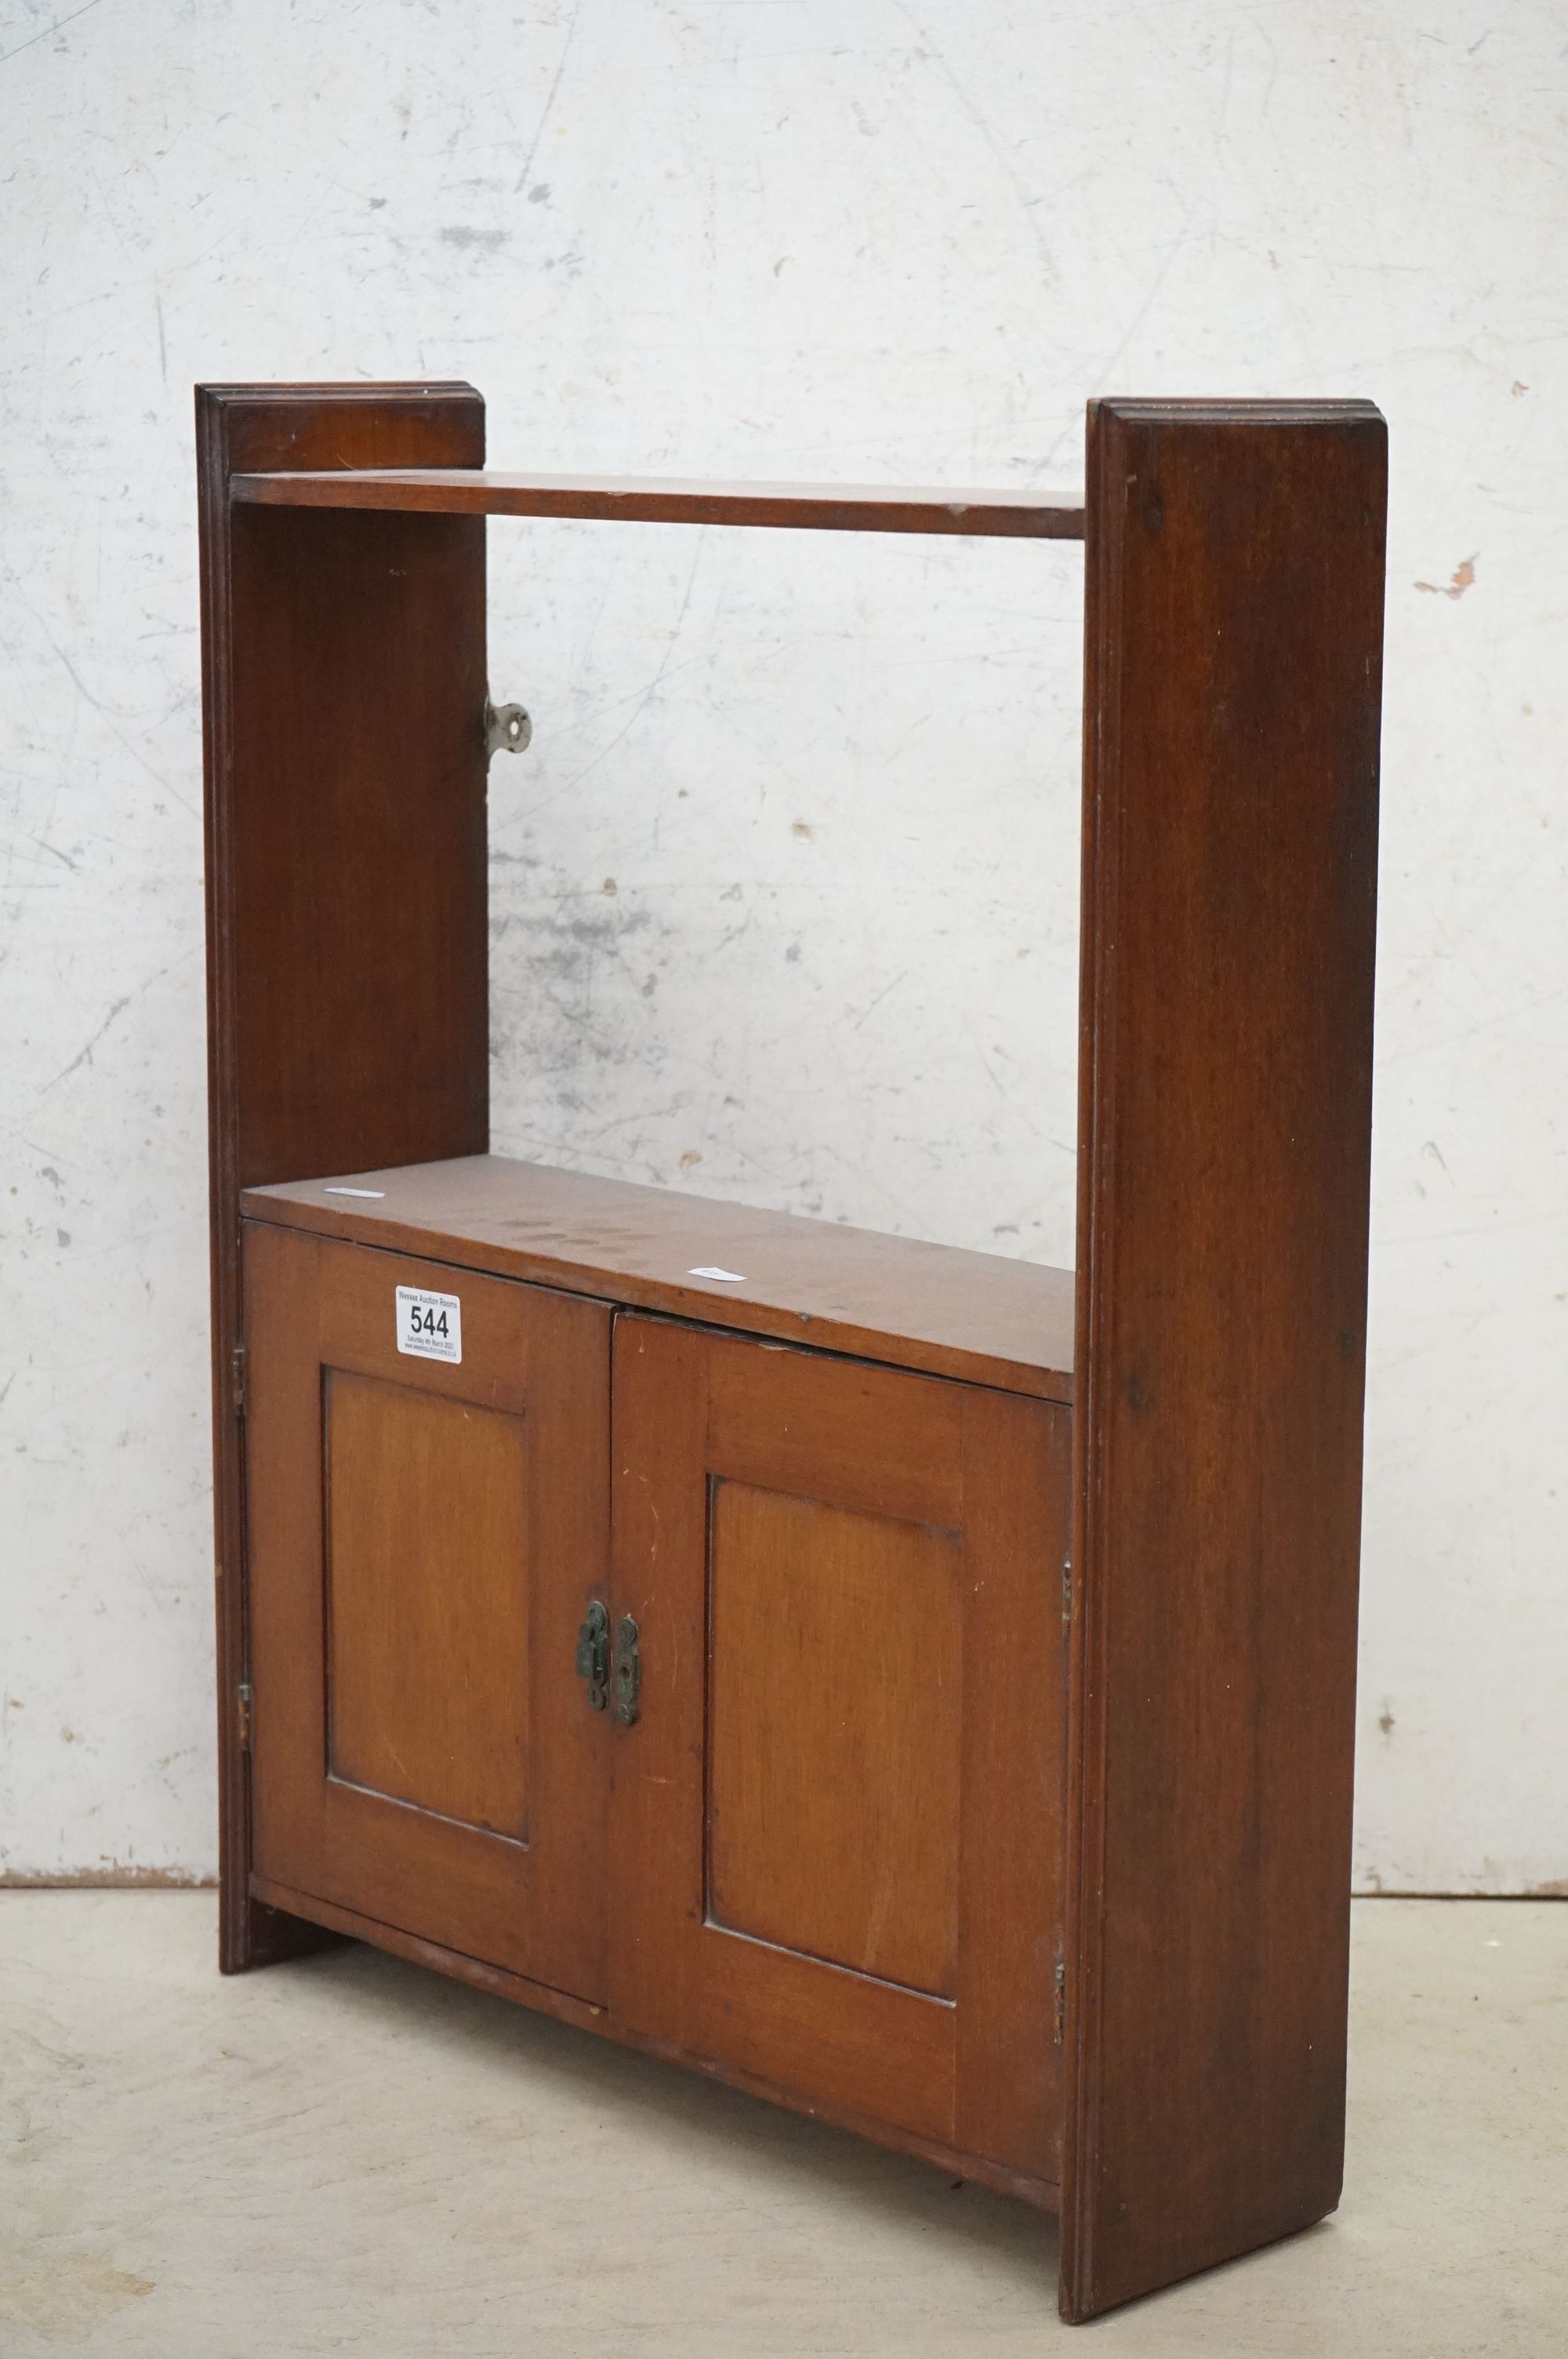 19th / Early 20th century Mahogany Hanging Wall Shelf and Cupboard, 48cm wide x 63cm high - Image 2 of 6